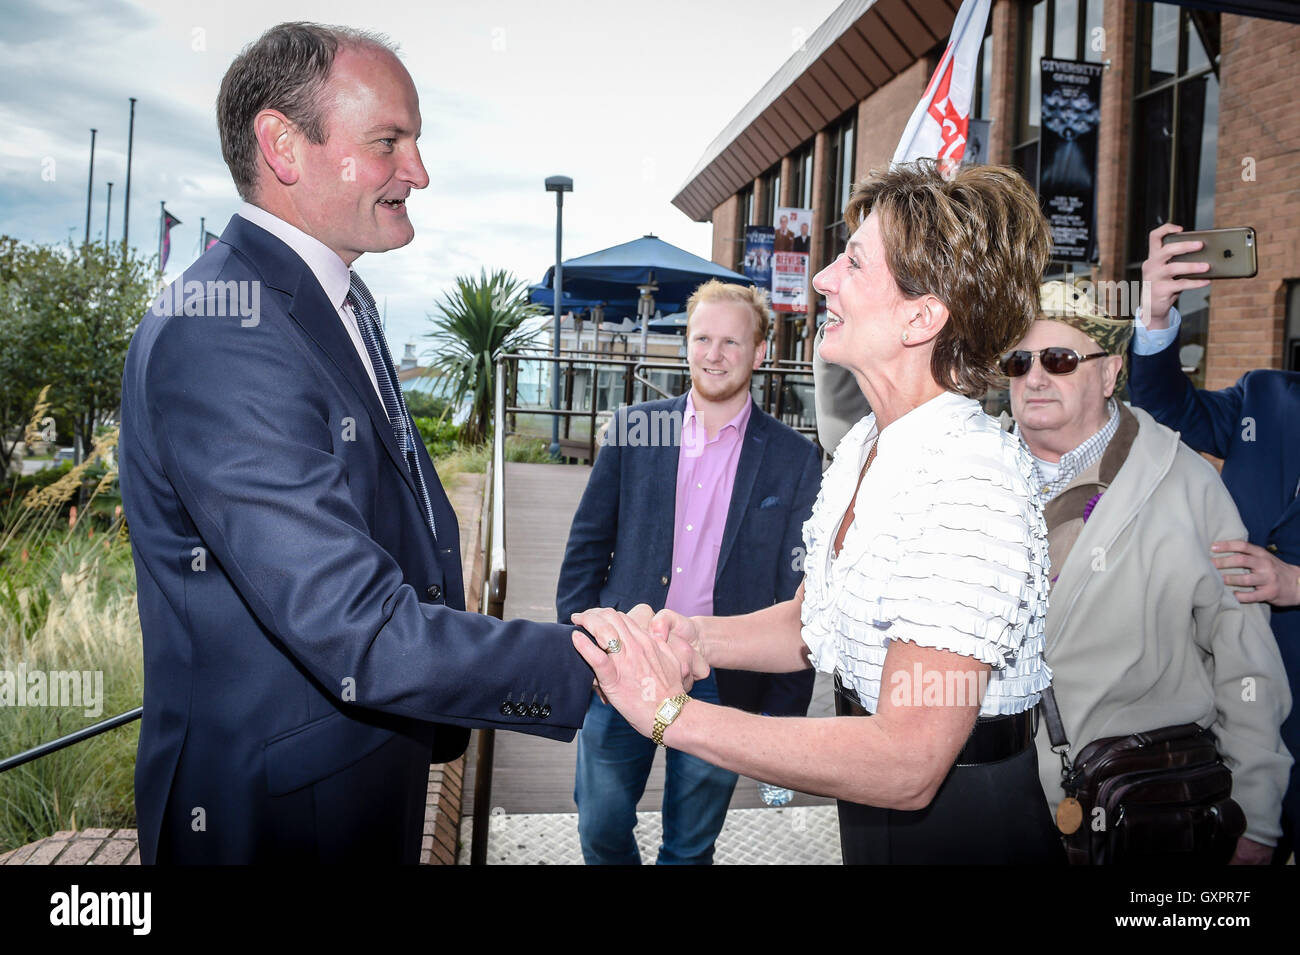 UKIP leader, Diane James, greets Douglas Carswell MP, as he arrives at the UKIP conference, Bournemouth. Stock Photo